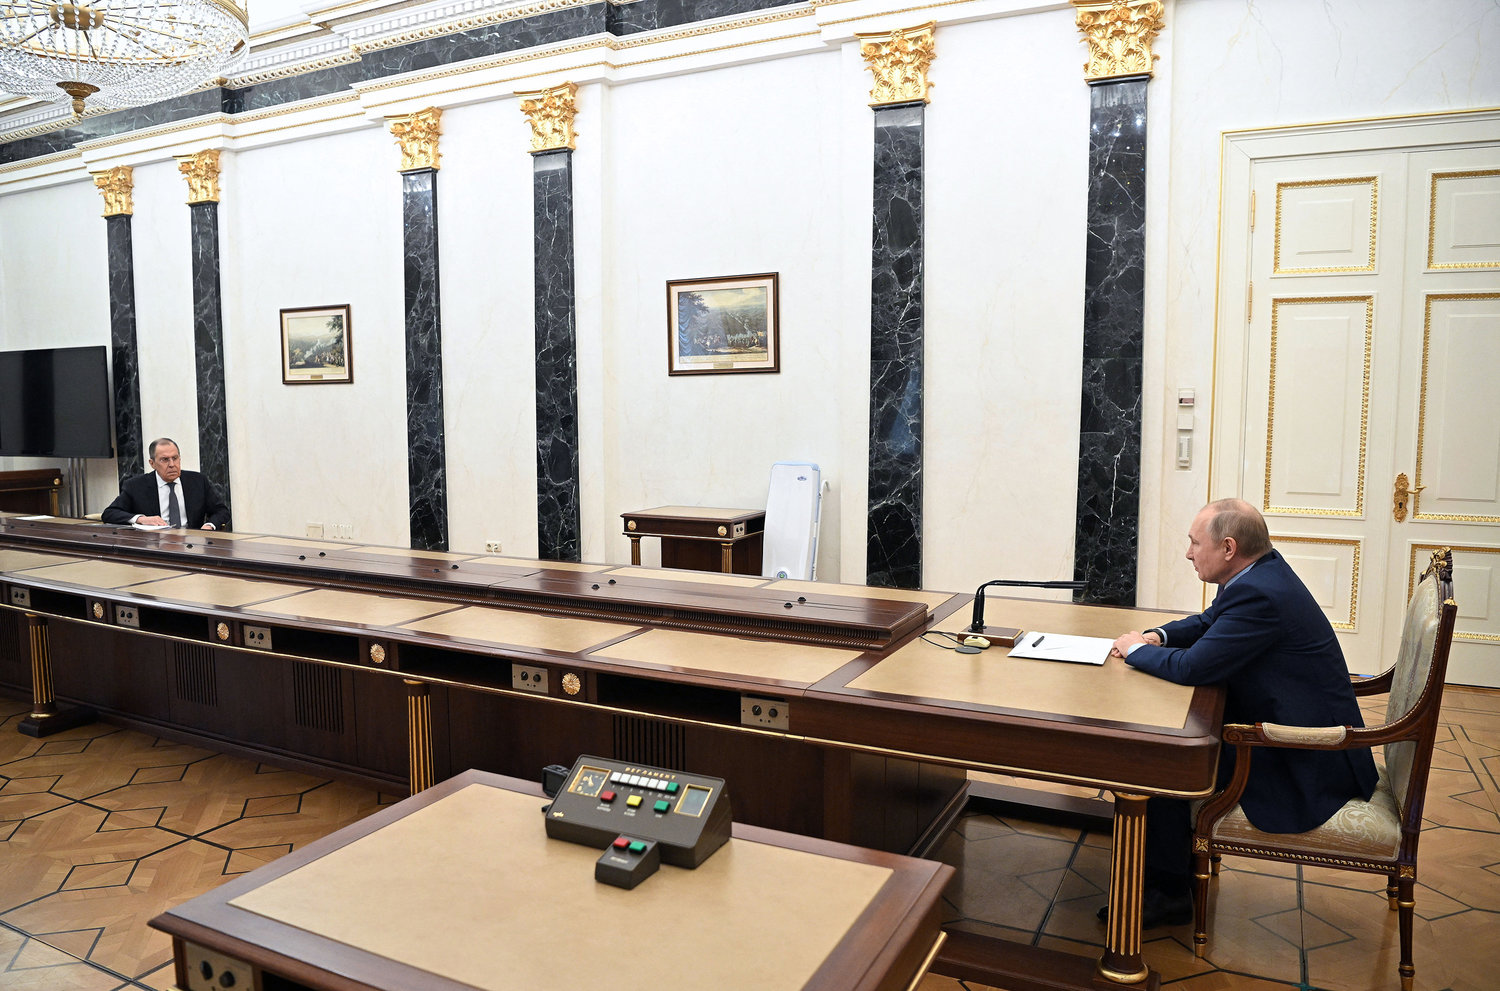 Russian President Vladimir Putin (right) and Foreign Minister Sergei Lavrov hold a meeting at the Kremlin, in Moscow on Monday, Feb. 14, 2022. (Alexei Nikolsky/Sputnik/AFP/Getty Images/TNS)